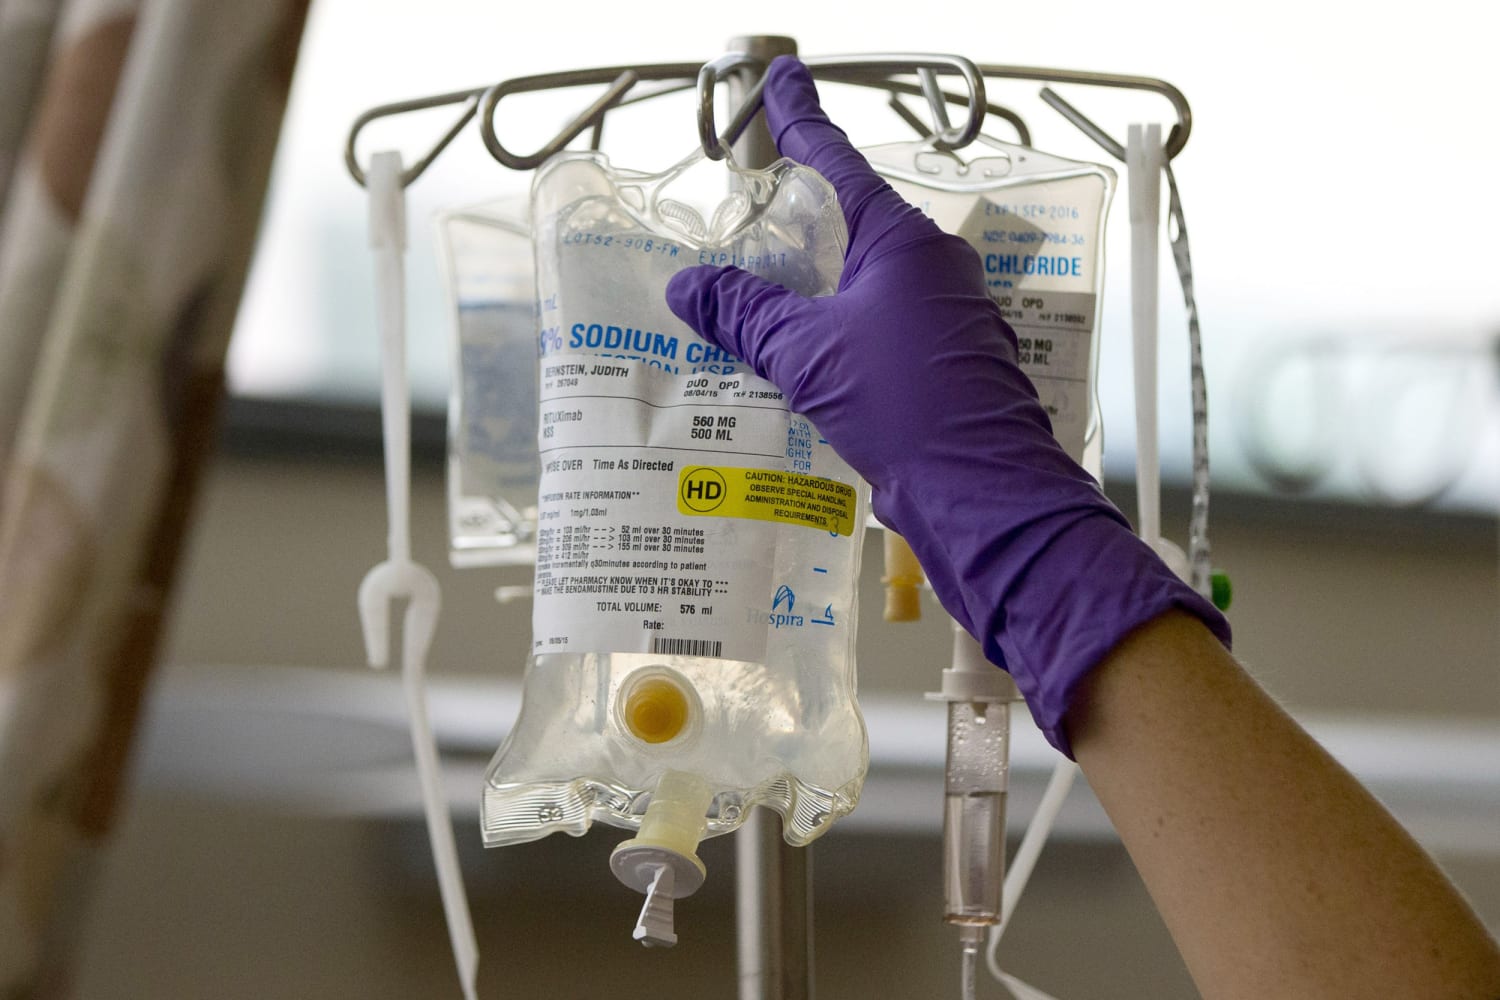 Is chemo obsolete? Not by a long shot, cancer experts say